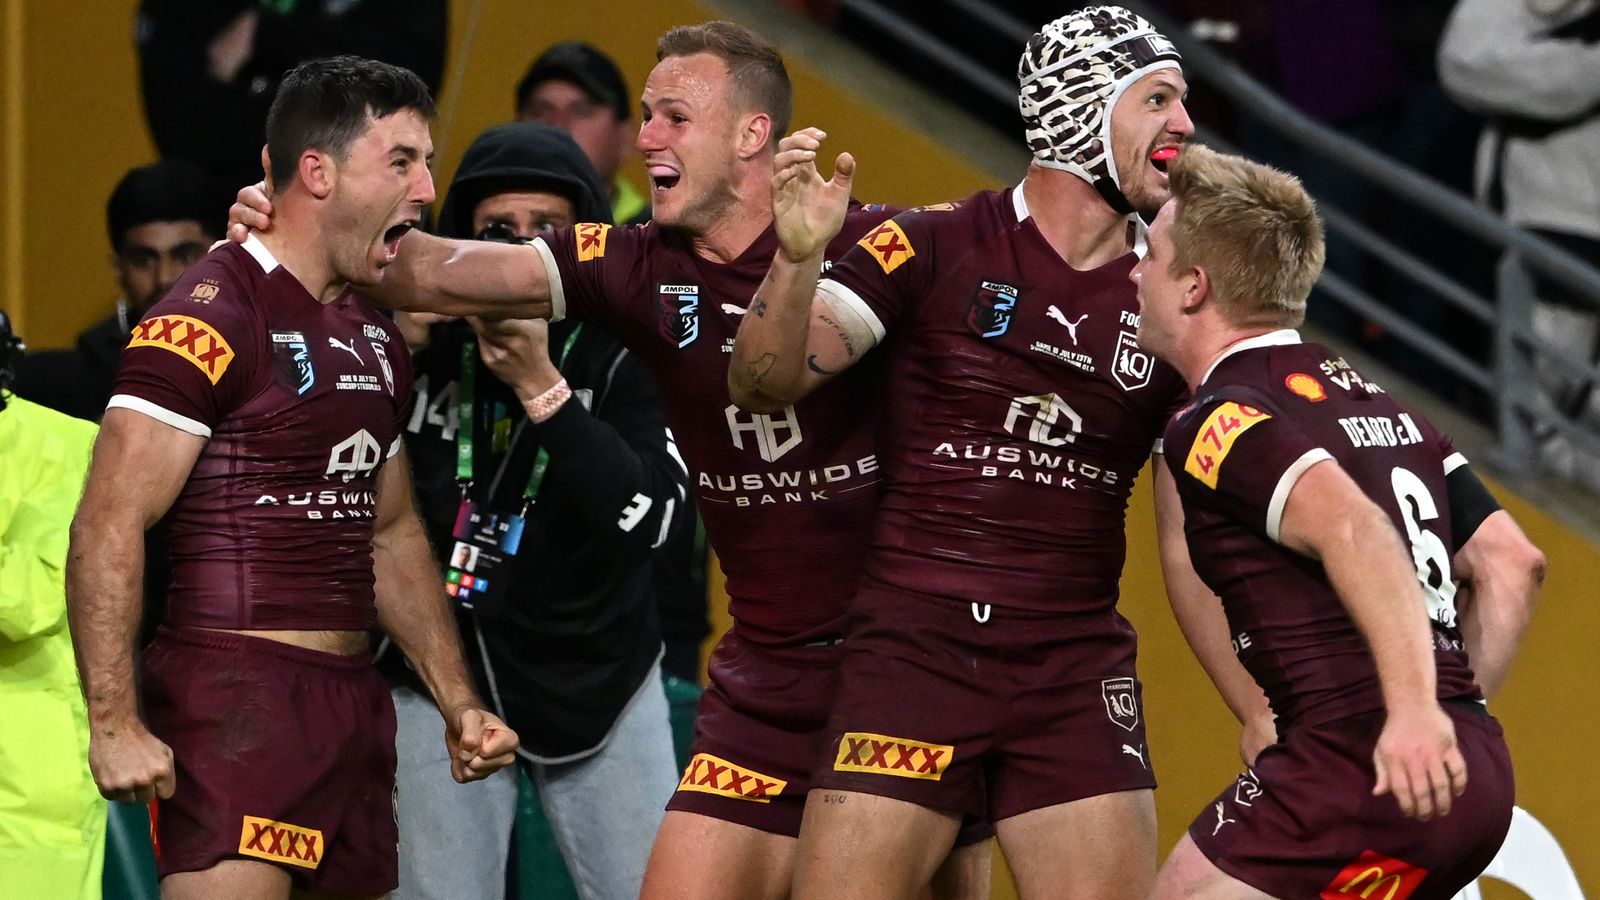 State of Origin: Queensland seal 2-1 series triumph with epic win over New South Wales in Brisbane